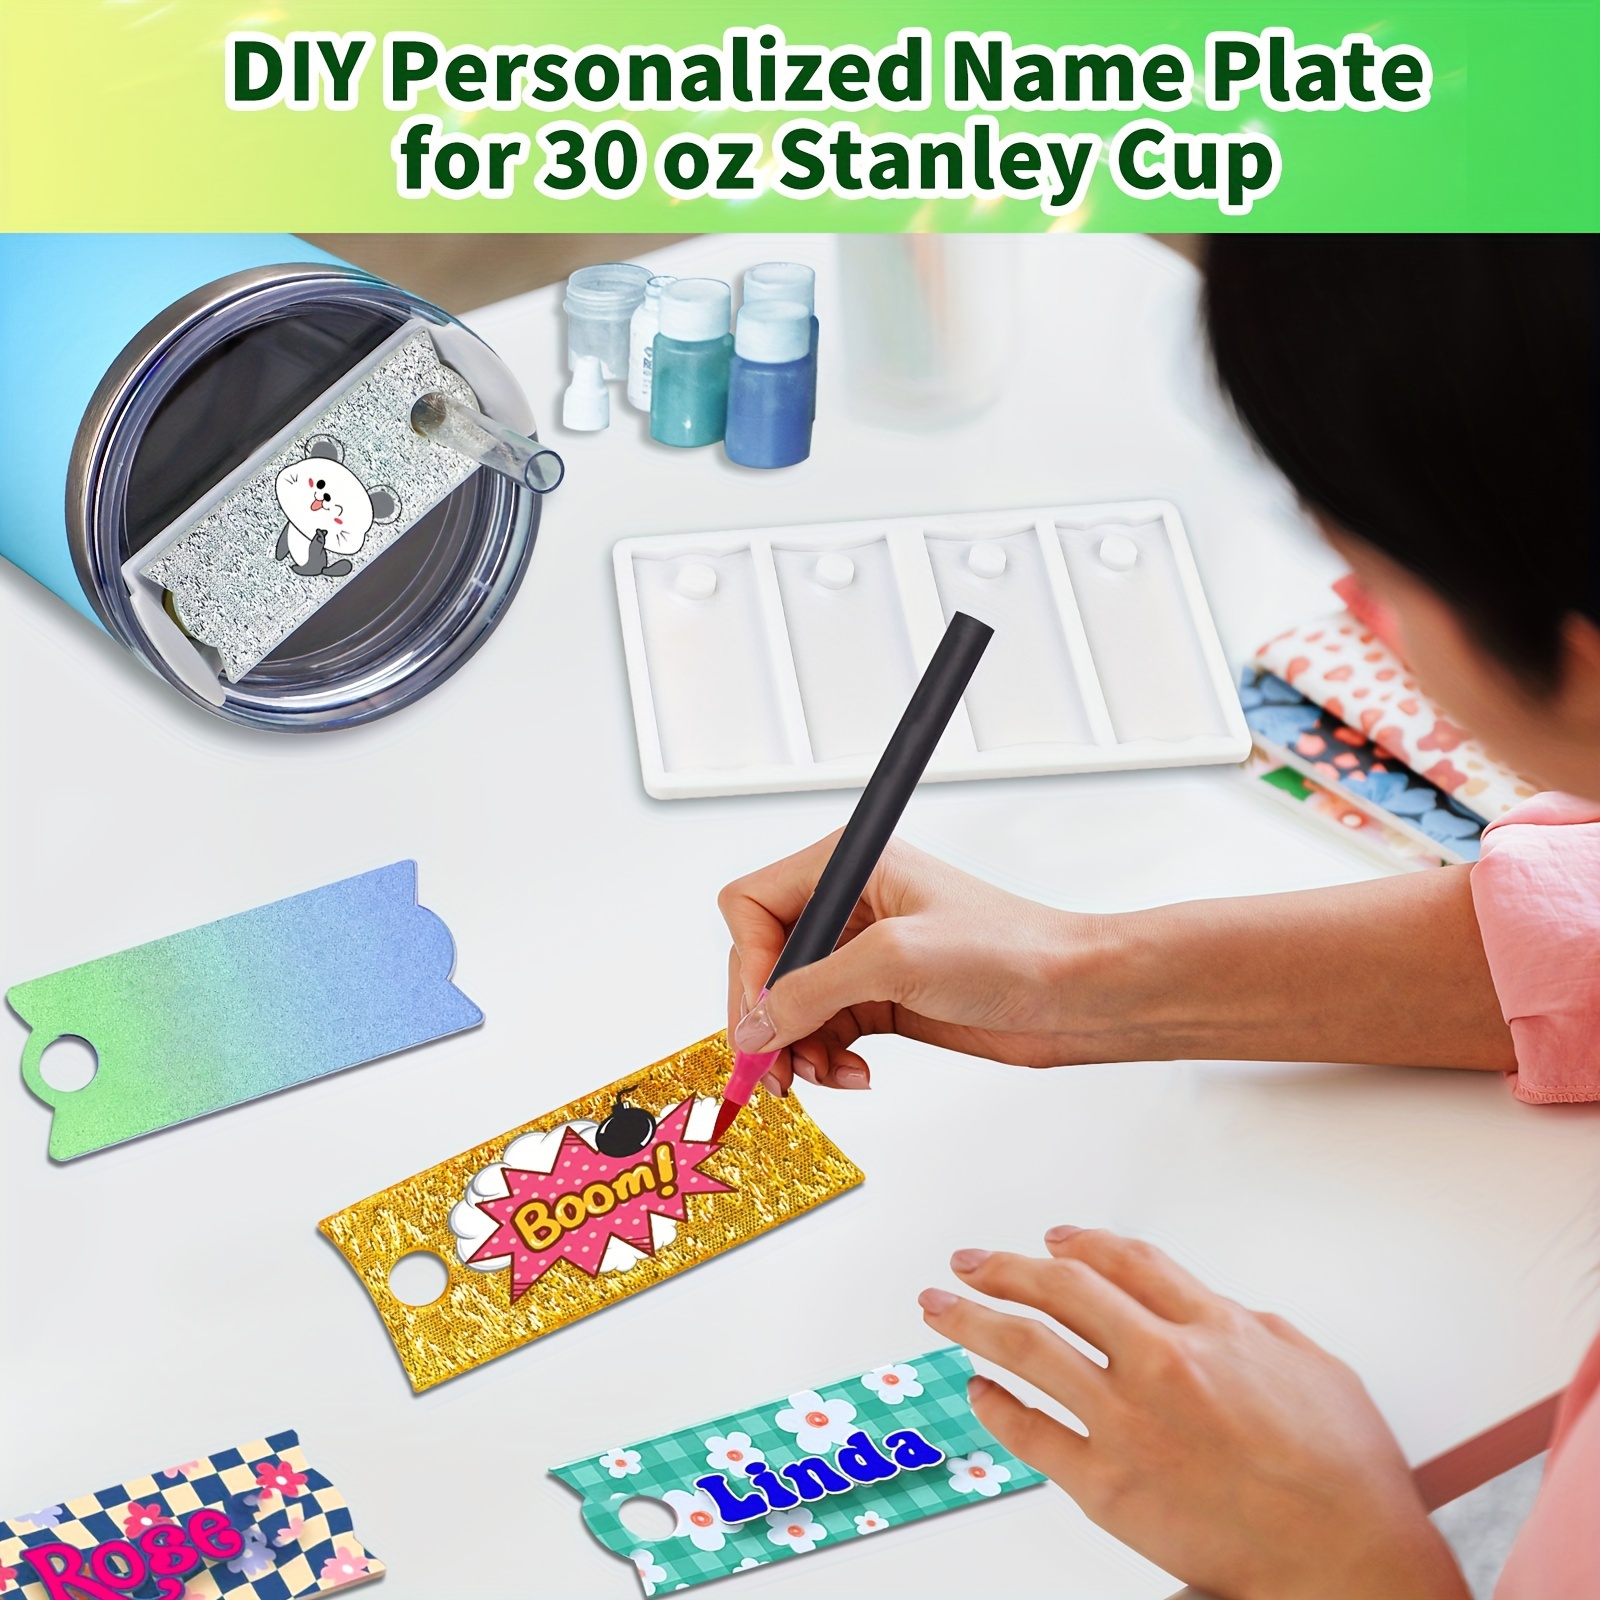 How to make stanley name plate mold｜TikTok Search